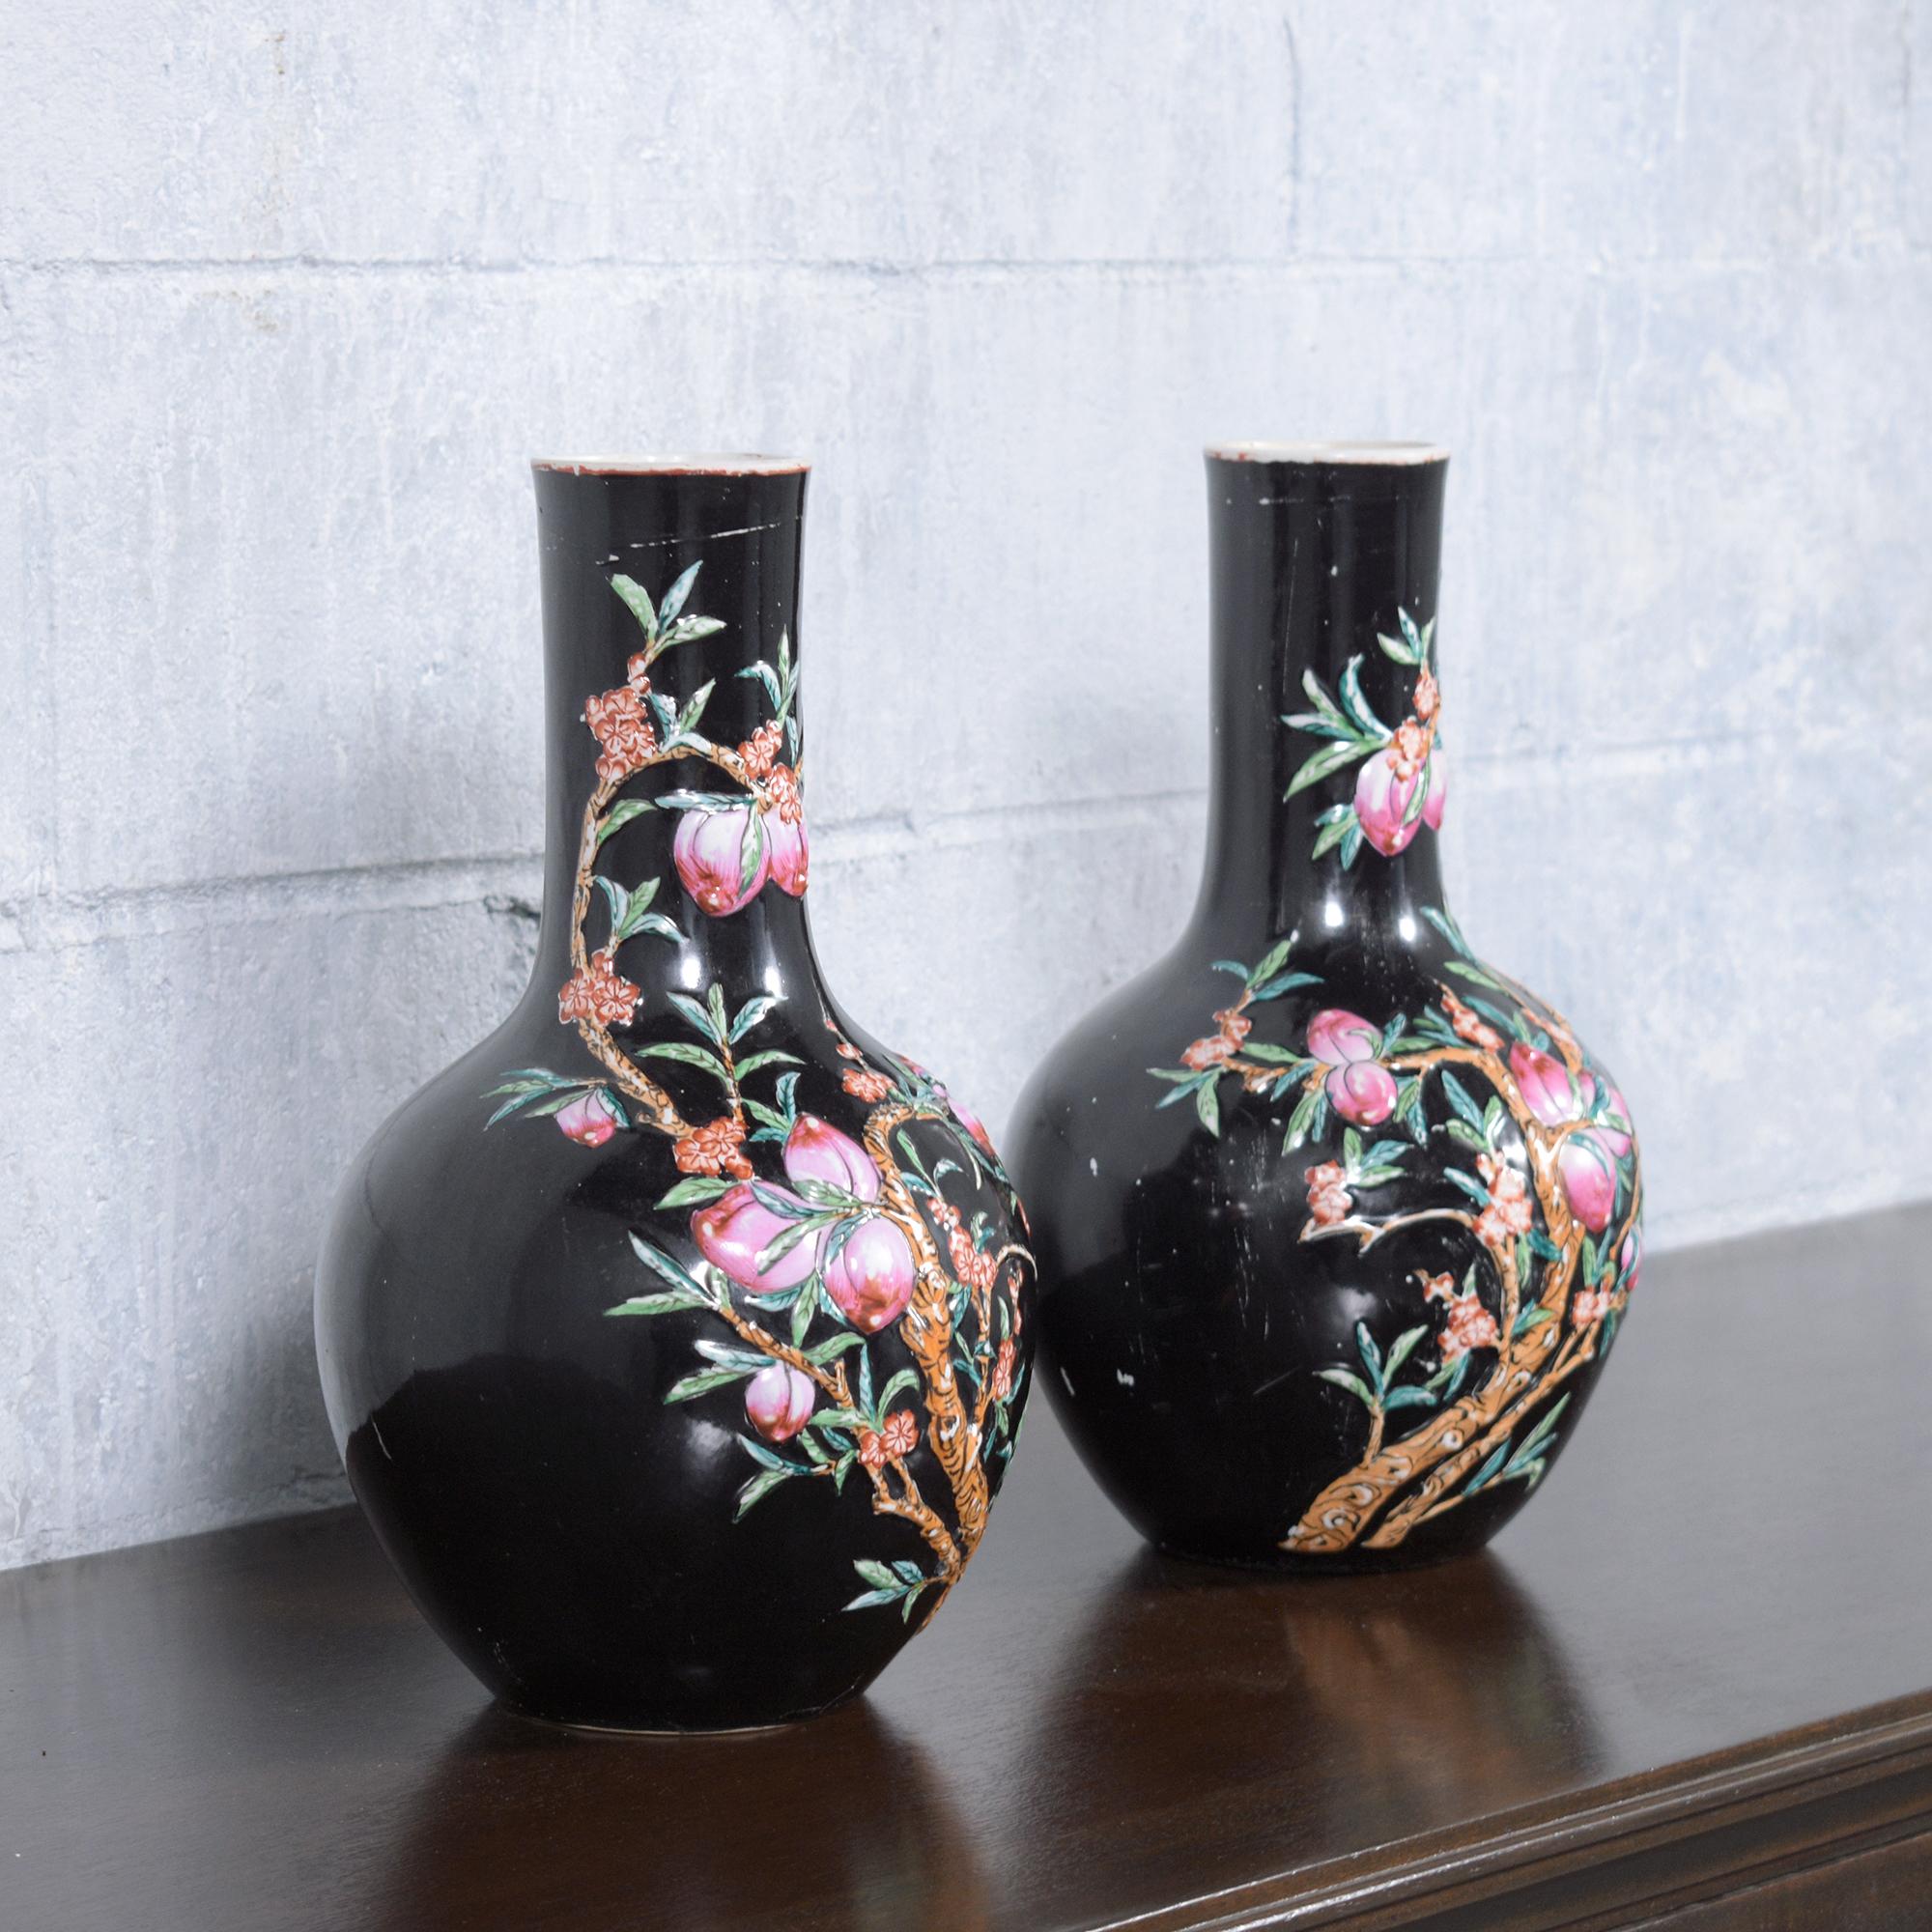 Neoclassical Revival Pair of Vintage Hand-Painted Chinese Porcelain Vases with Floral & Fruit Pattern For Sale